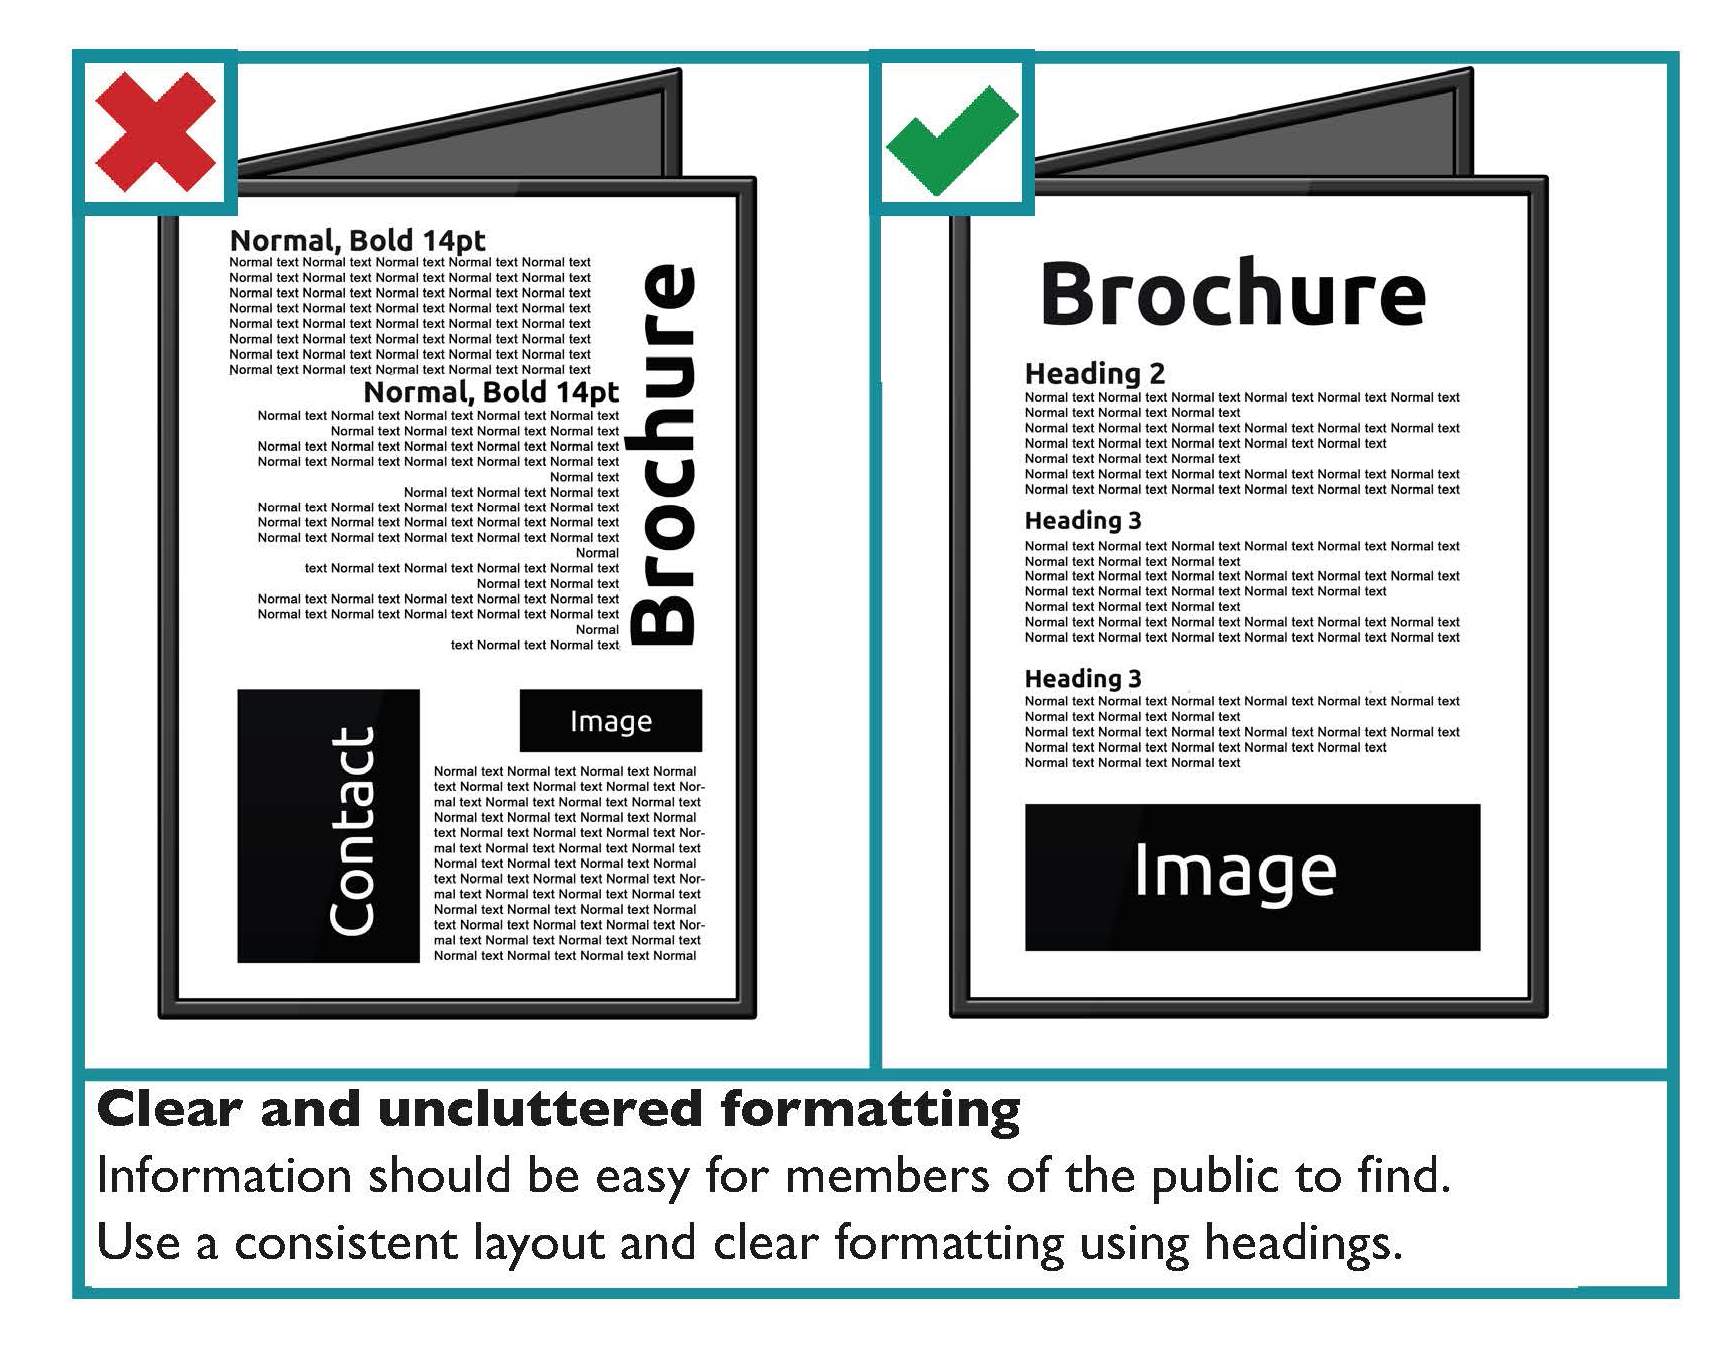 An example showing how clear and uncluttered formatting makes information easier to find.